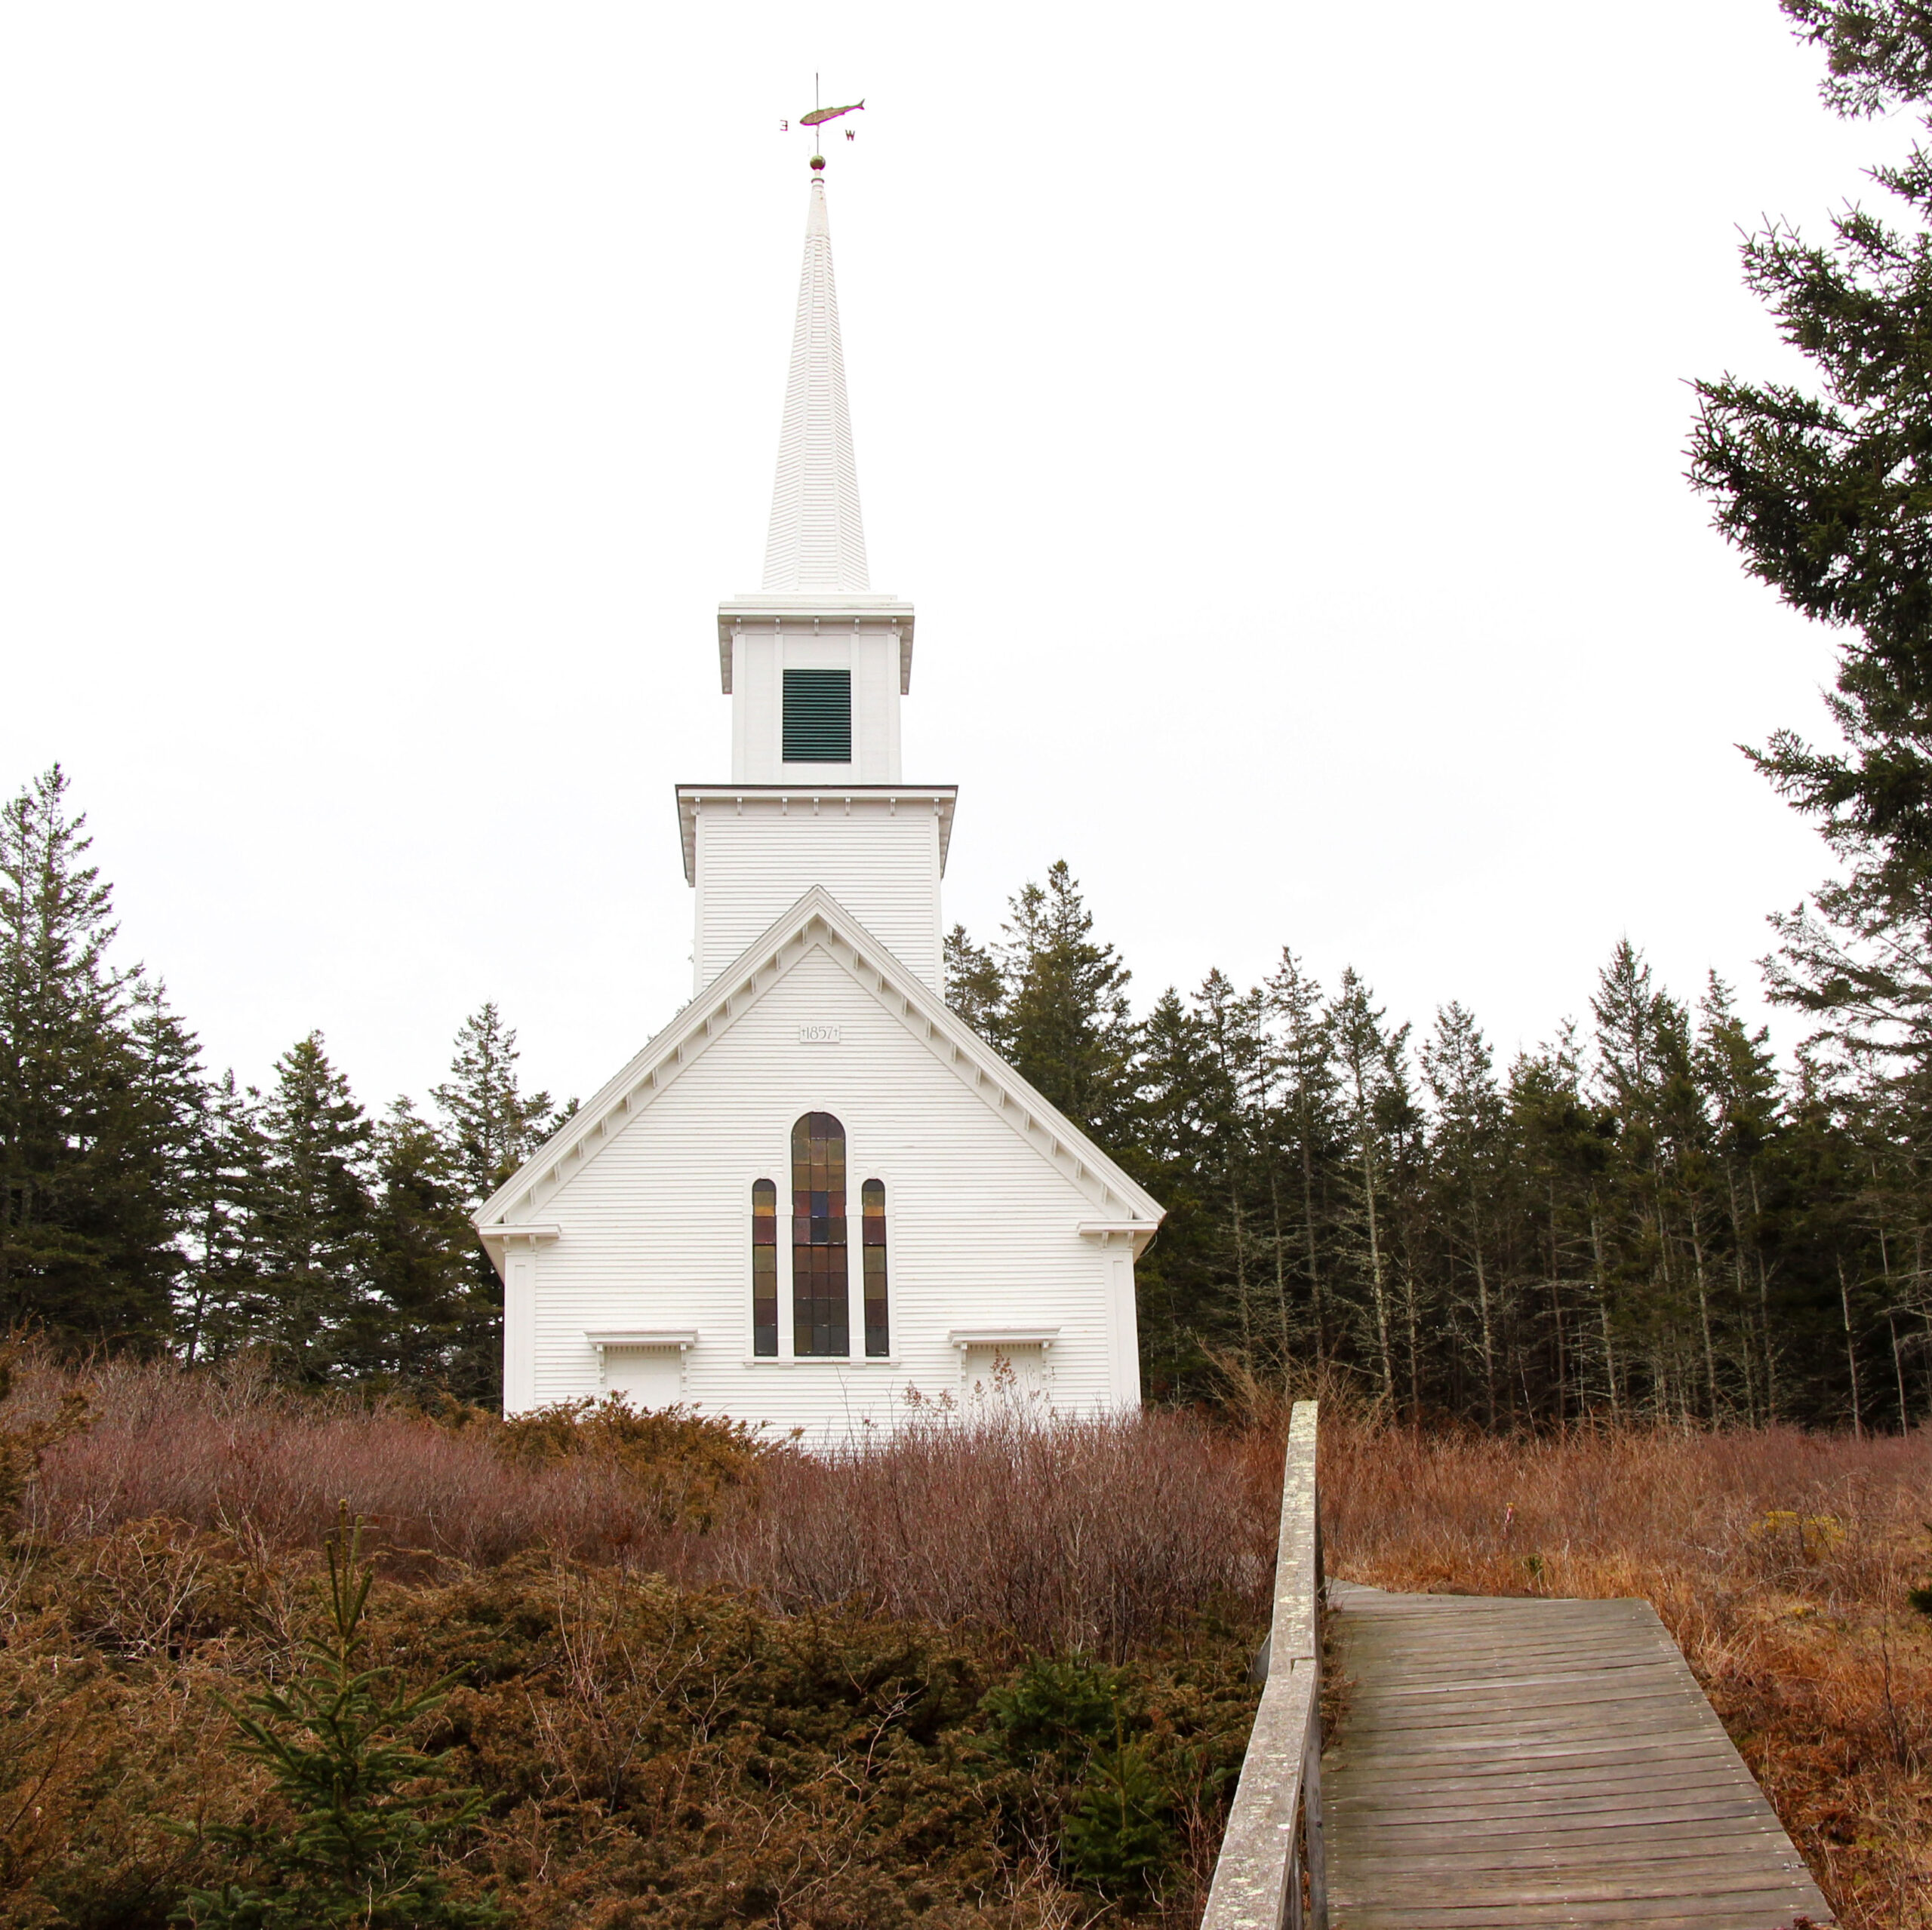 A photo of a church on a hill. It is a simple white church with a steeple and stained glass window 